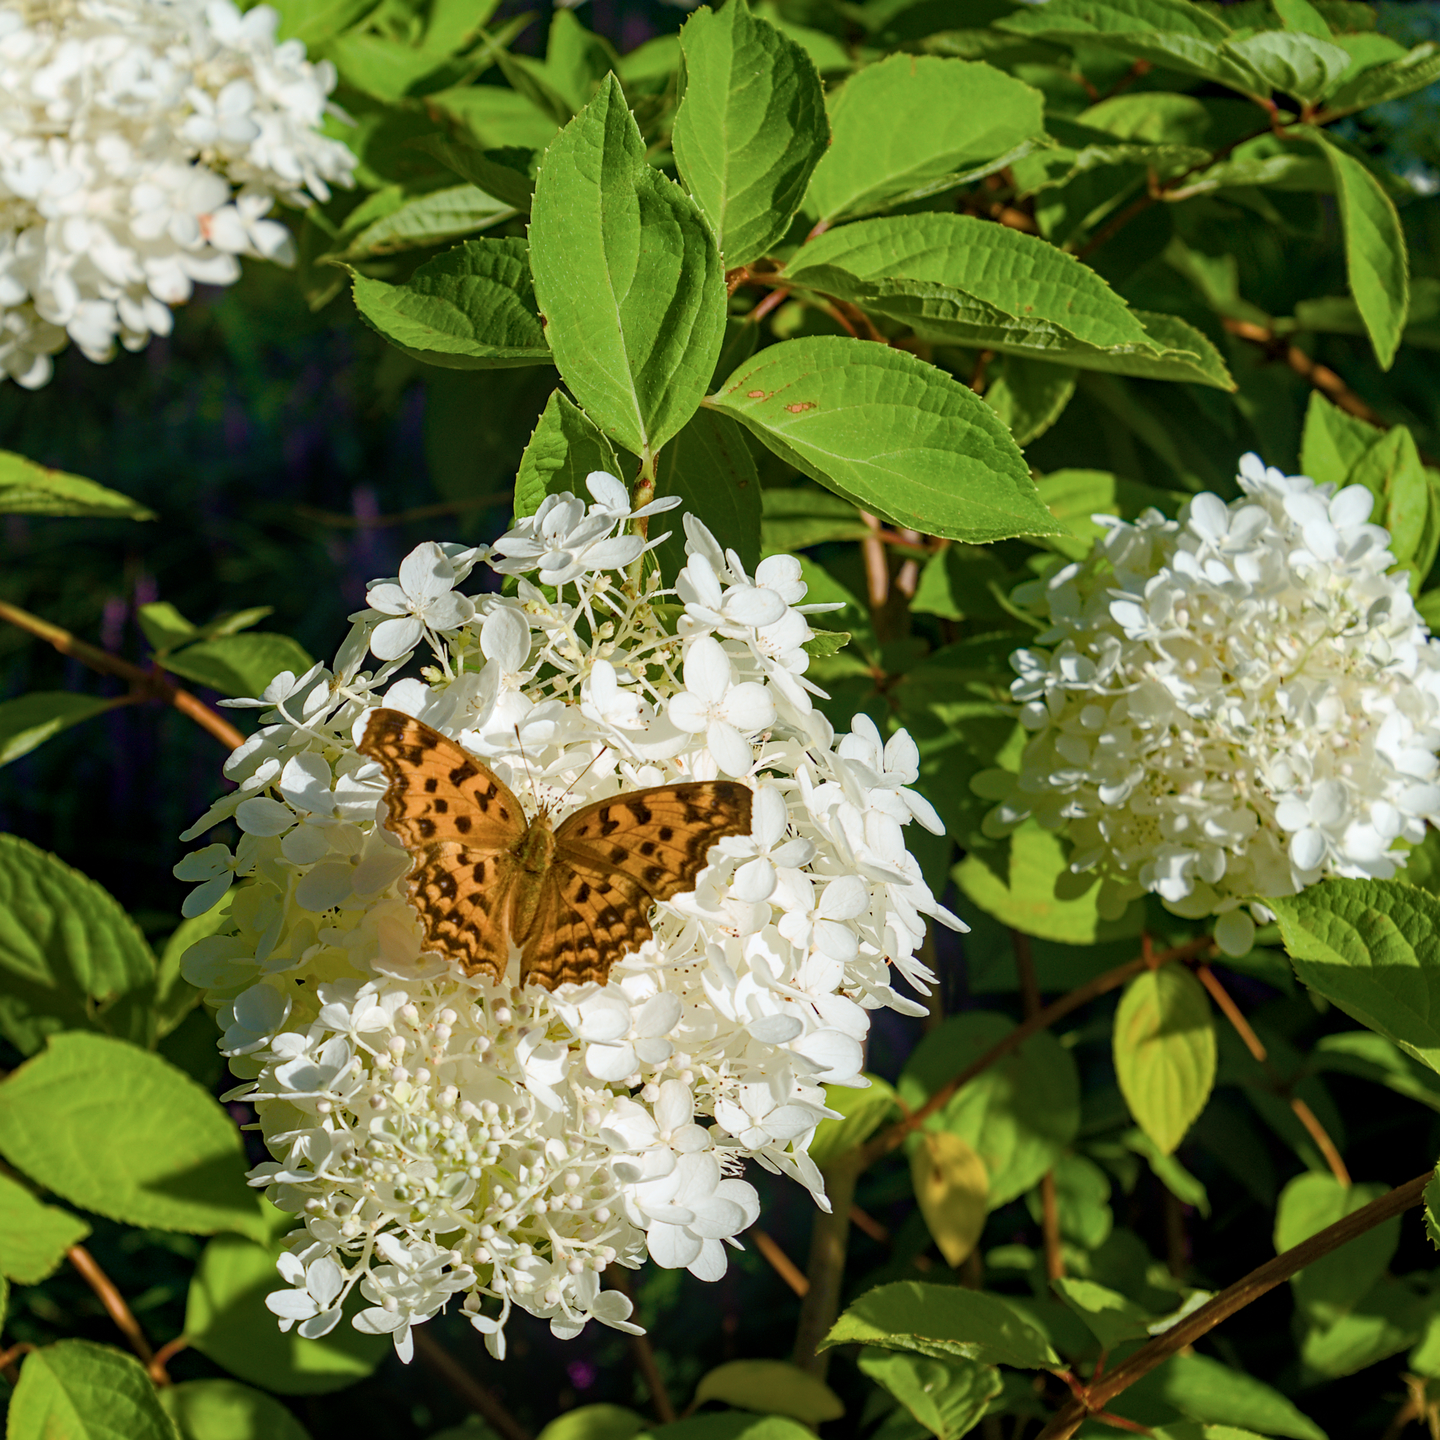 fritillary butterfly feeding on white sheep flowers